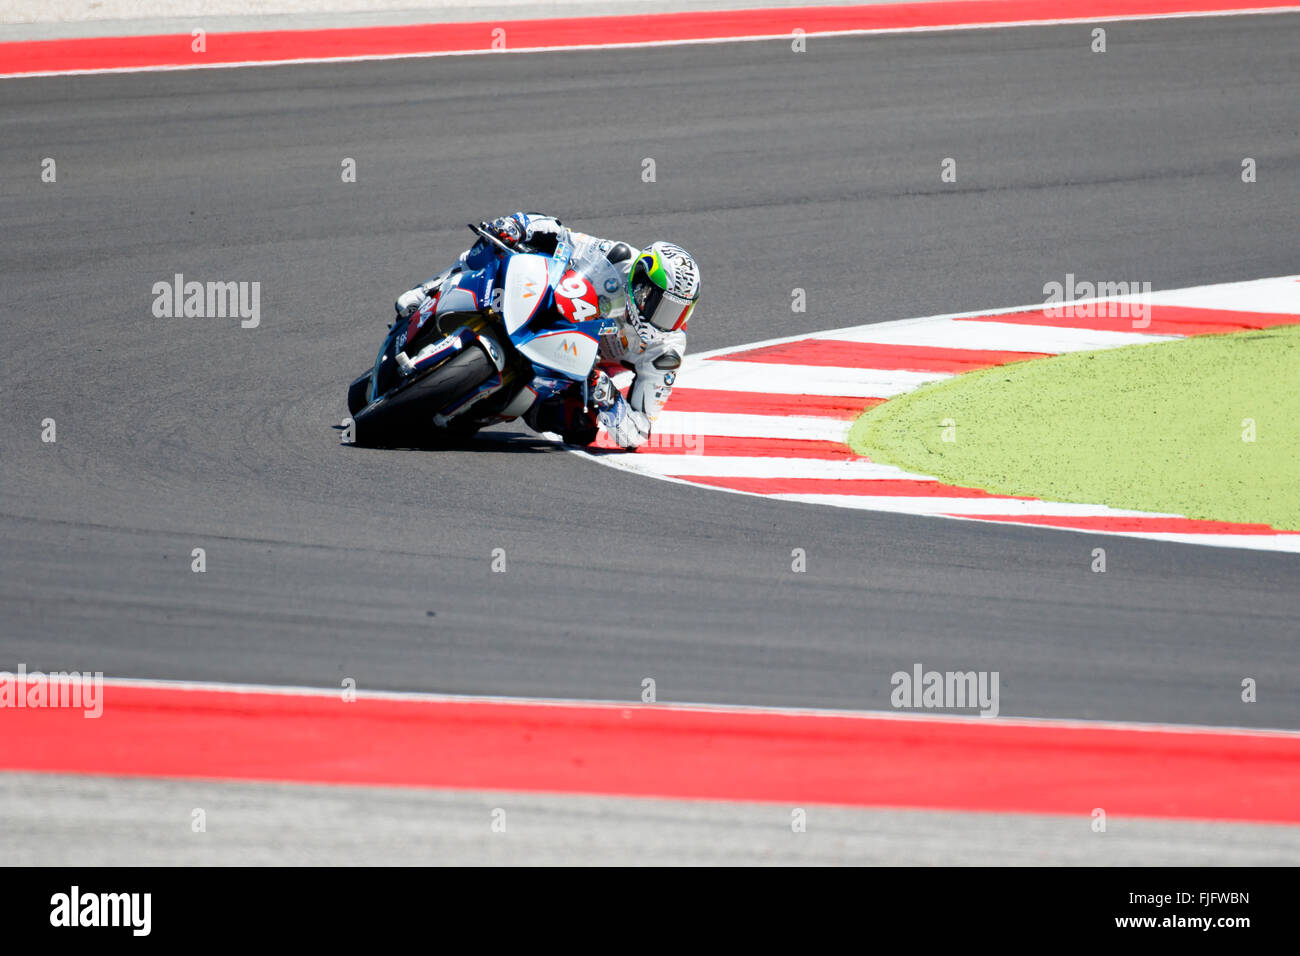 Misano Adriatico, Italy - June 21, 2015: BMW S1000 RR of Team ASPI, driven by LUSSIANA Matthieu in action during the Superstock 1000 Race during the FIM Superstock 1000 - race at Misano World Circuit on June 21, 2015 in Misano Adriatico, Italy. Stock Photo